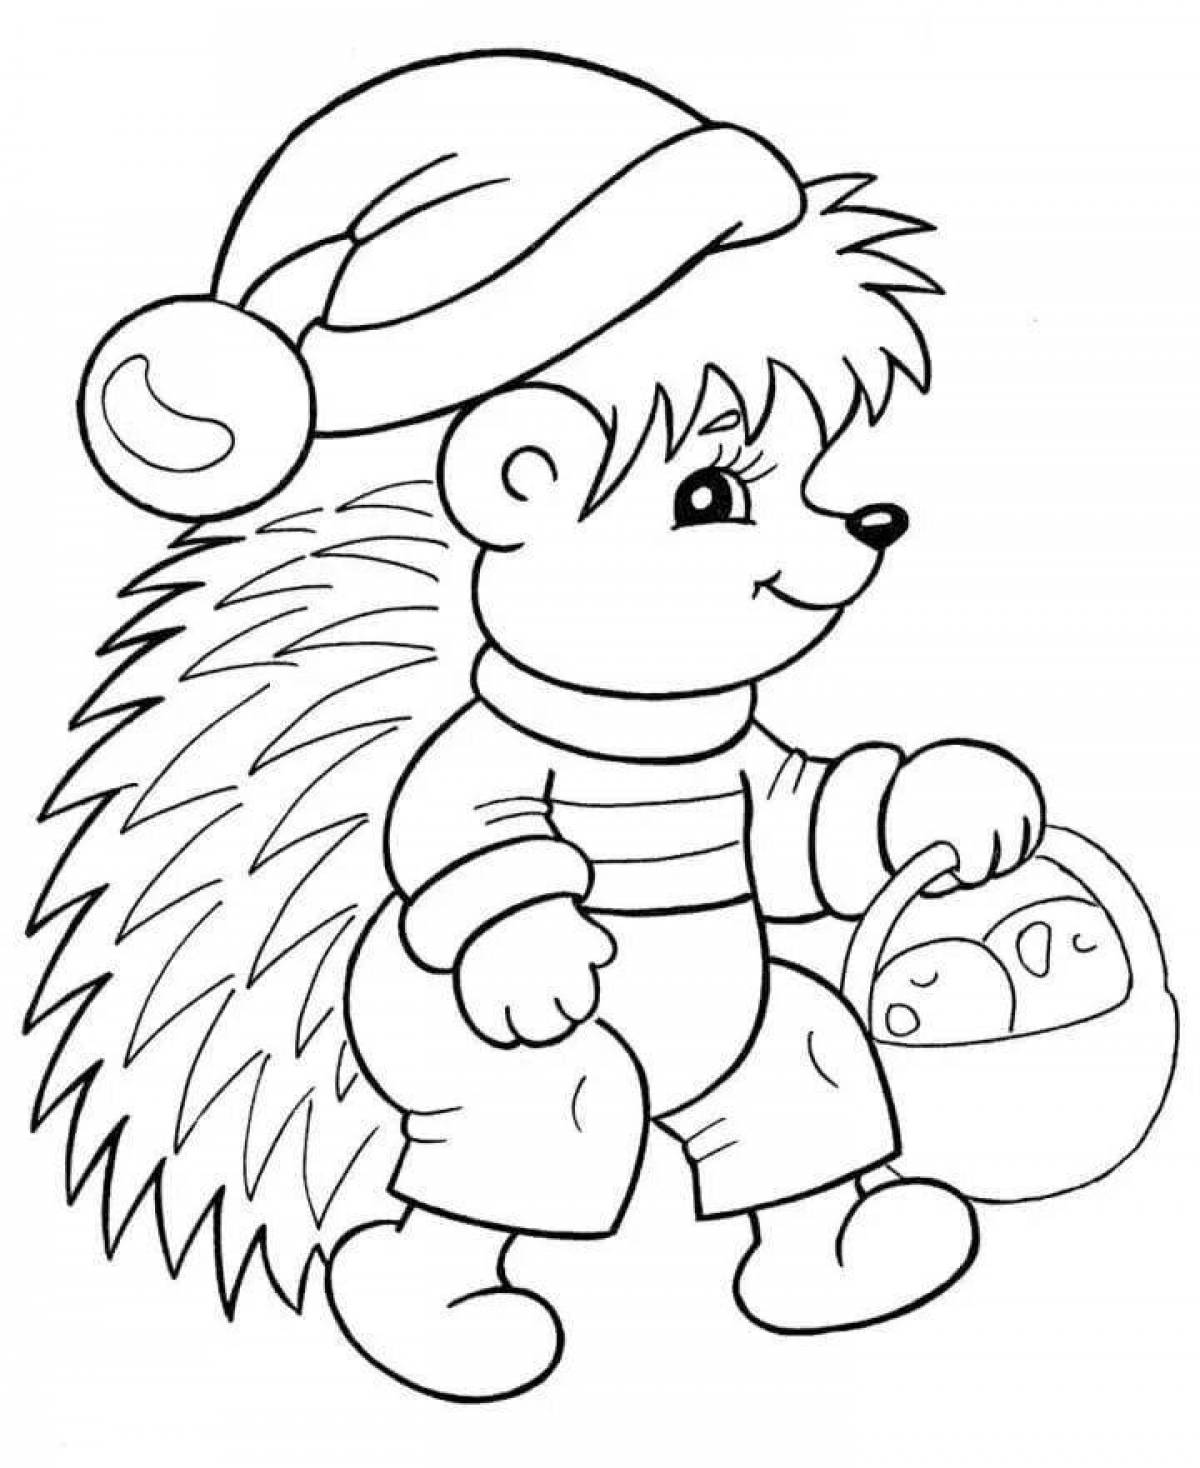 Colour-obsessed hedgehog coloring pages for kids